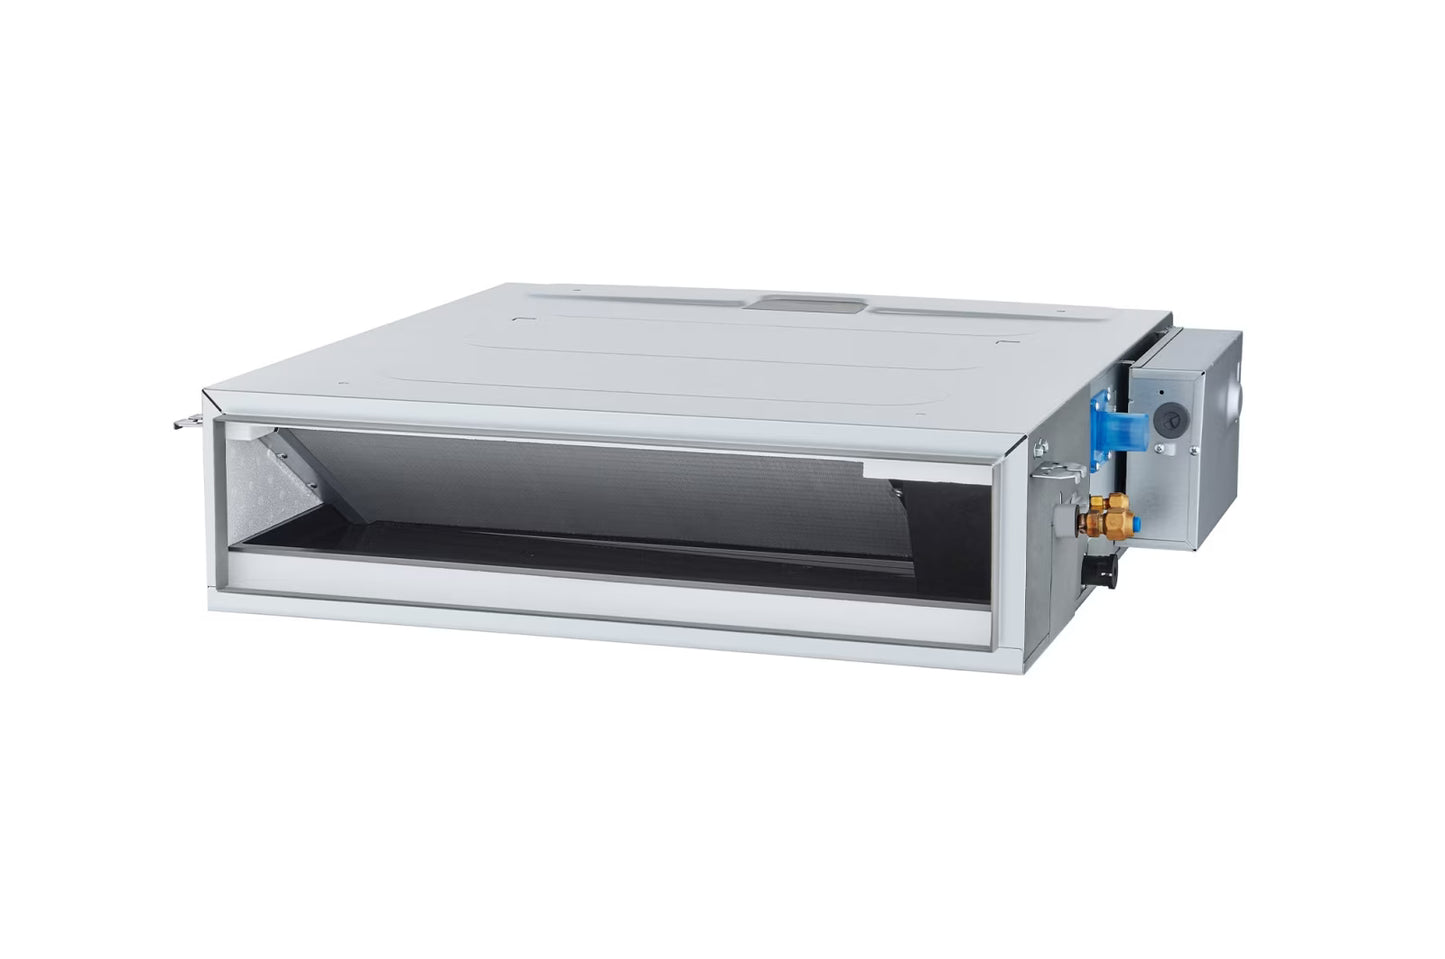 LG Ceiling Concealed Duct Unit 6.0KW with Low Static and E.S.P. Control for Multiple Rooms - ARNU21GL3G4